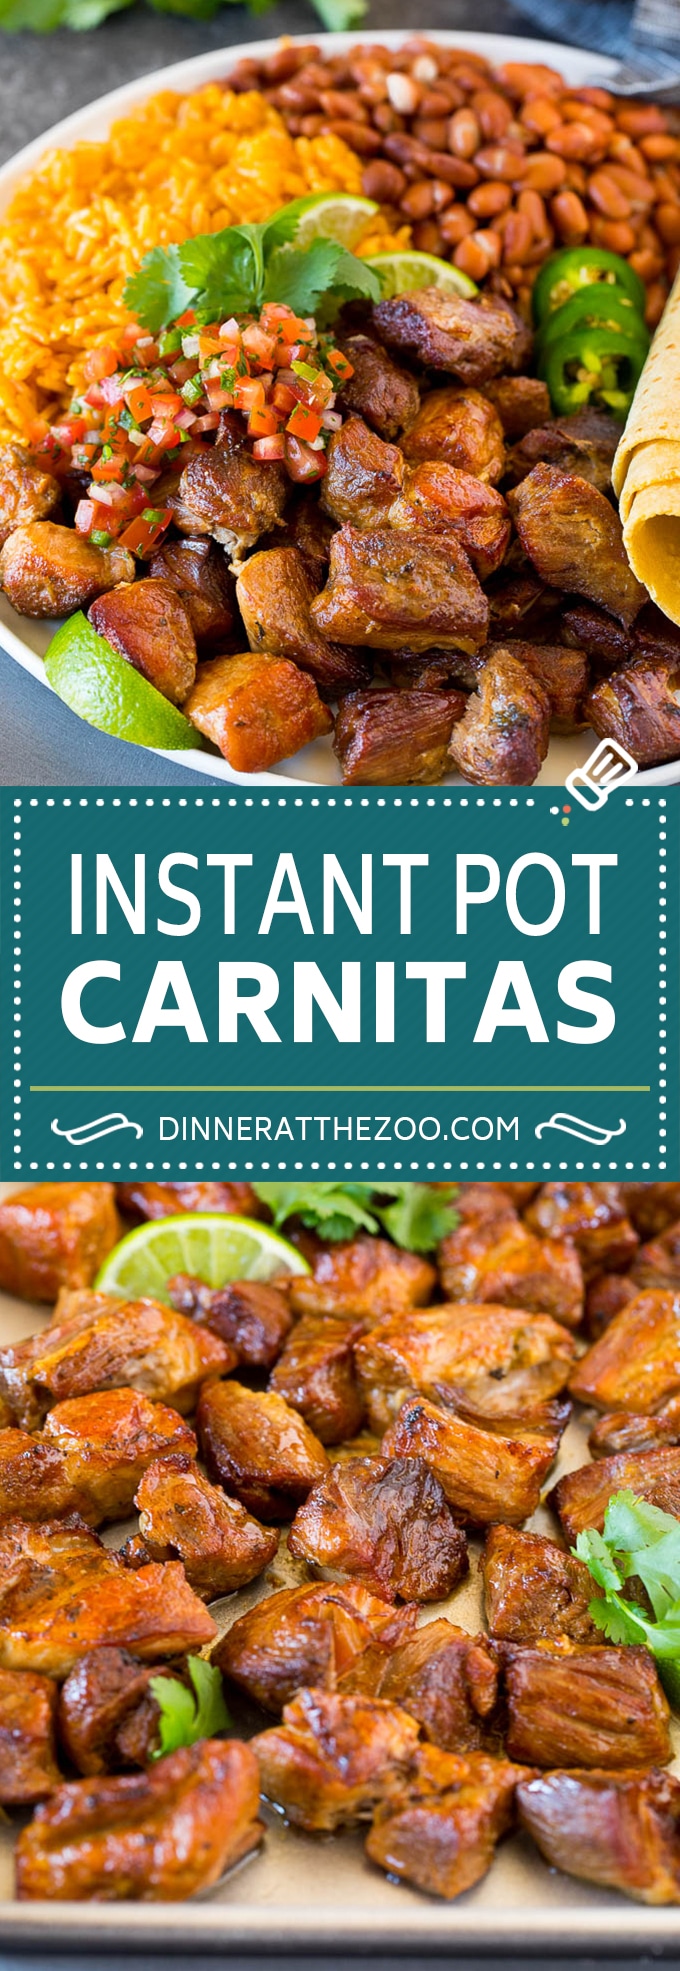 This Instant Pot carnitas recipe is pork seared to golden brown perfection, then pressure cooked with citrus and spices.